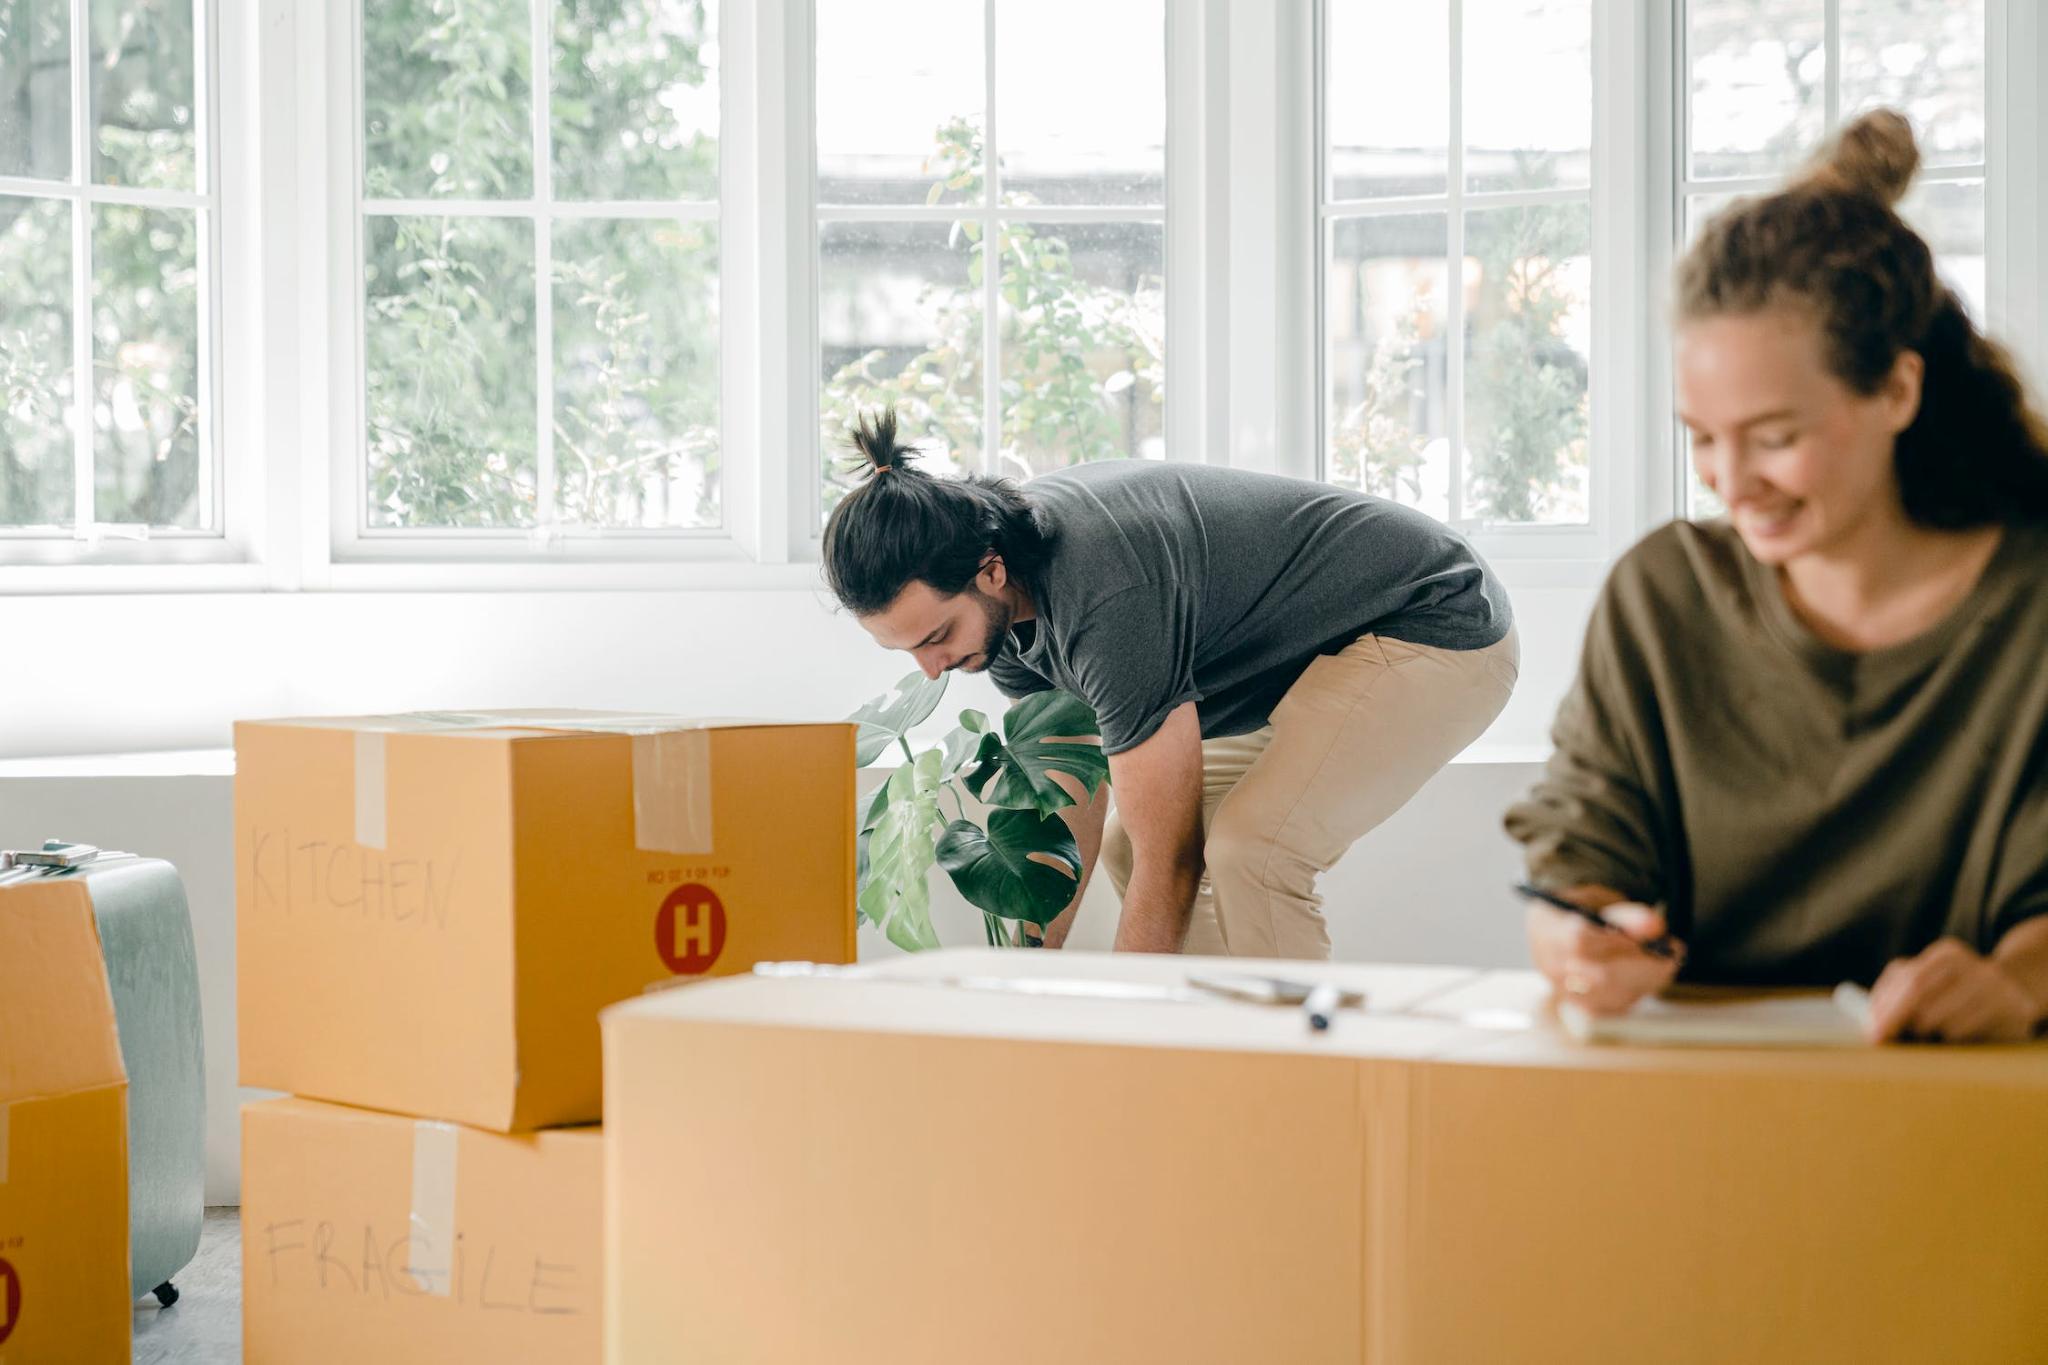 An image of a couple unpacking boxes at home